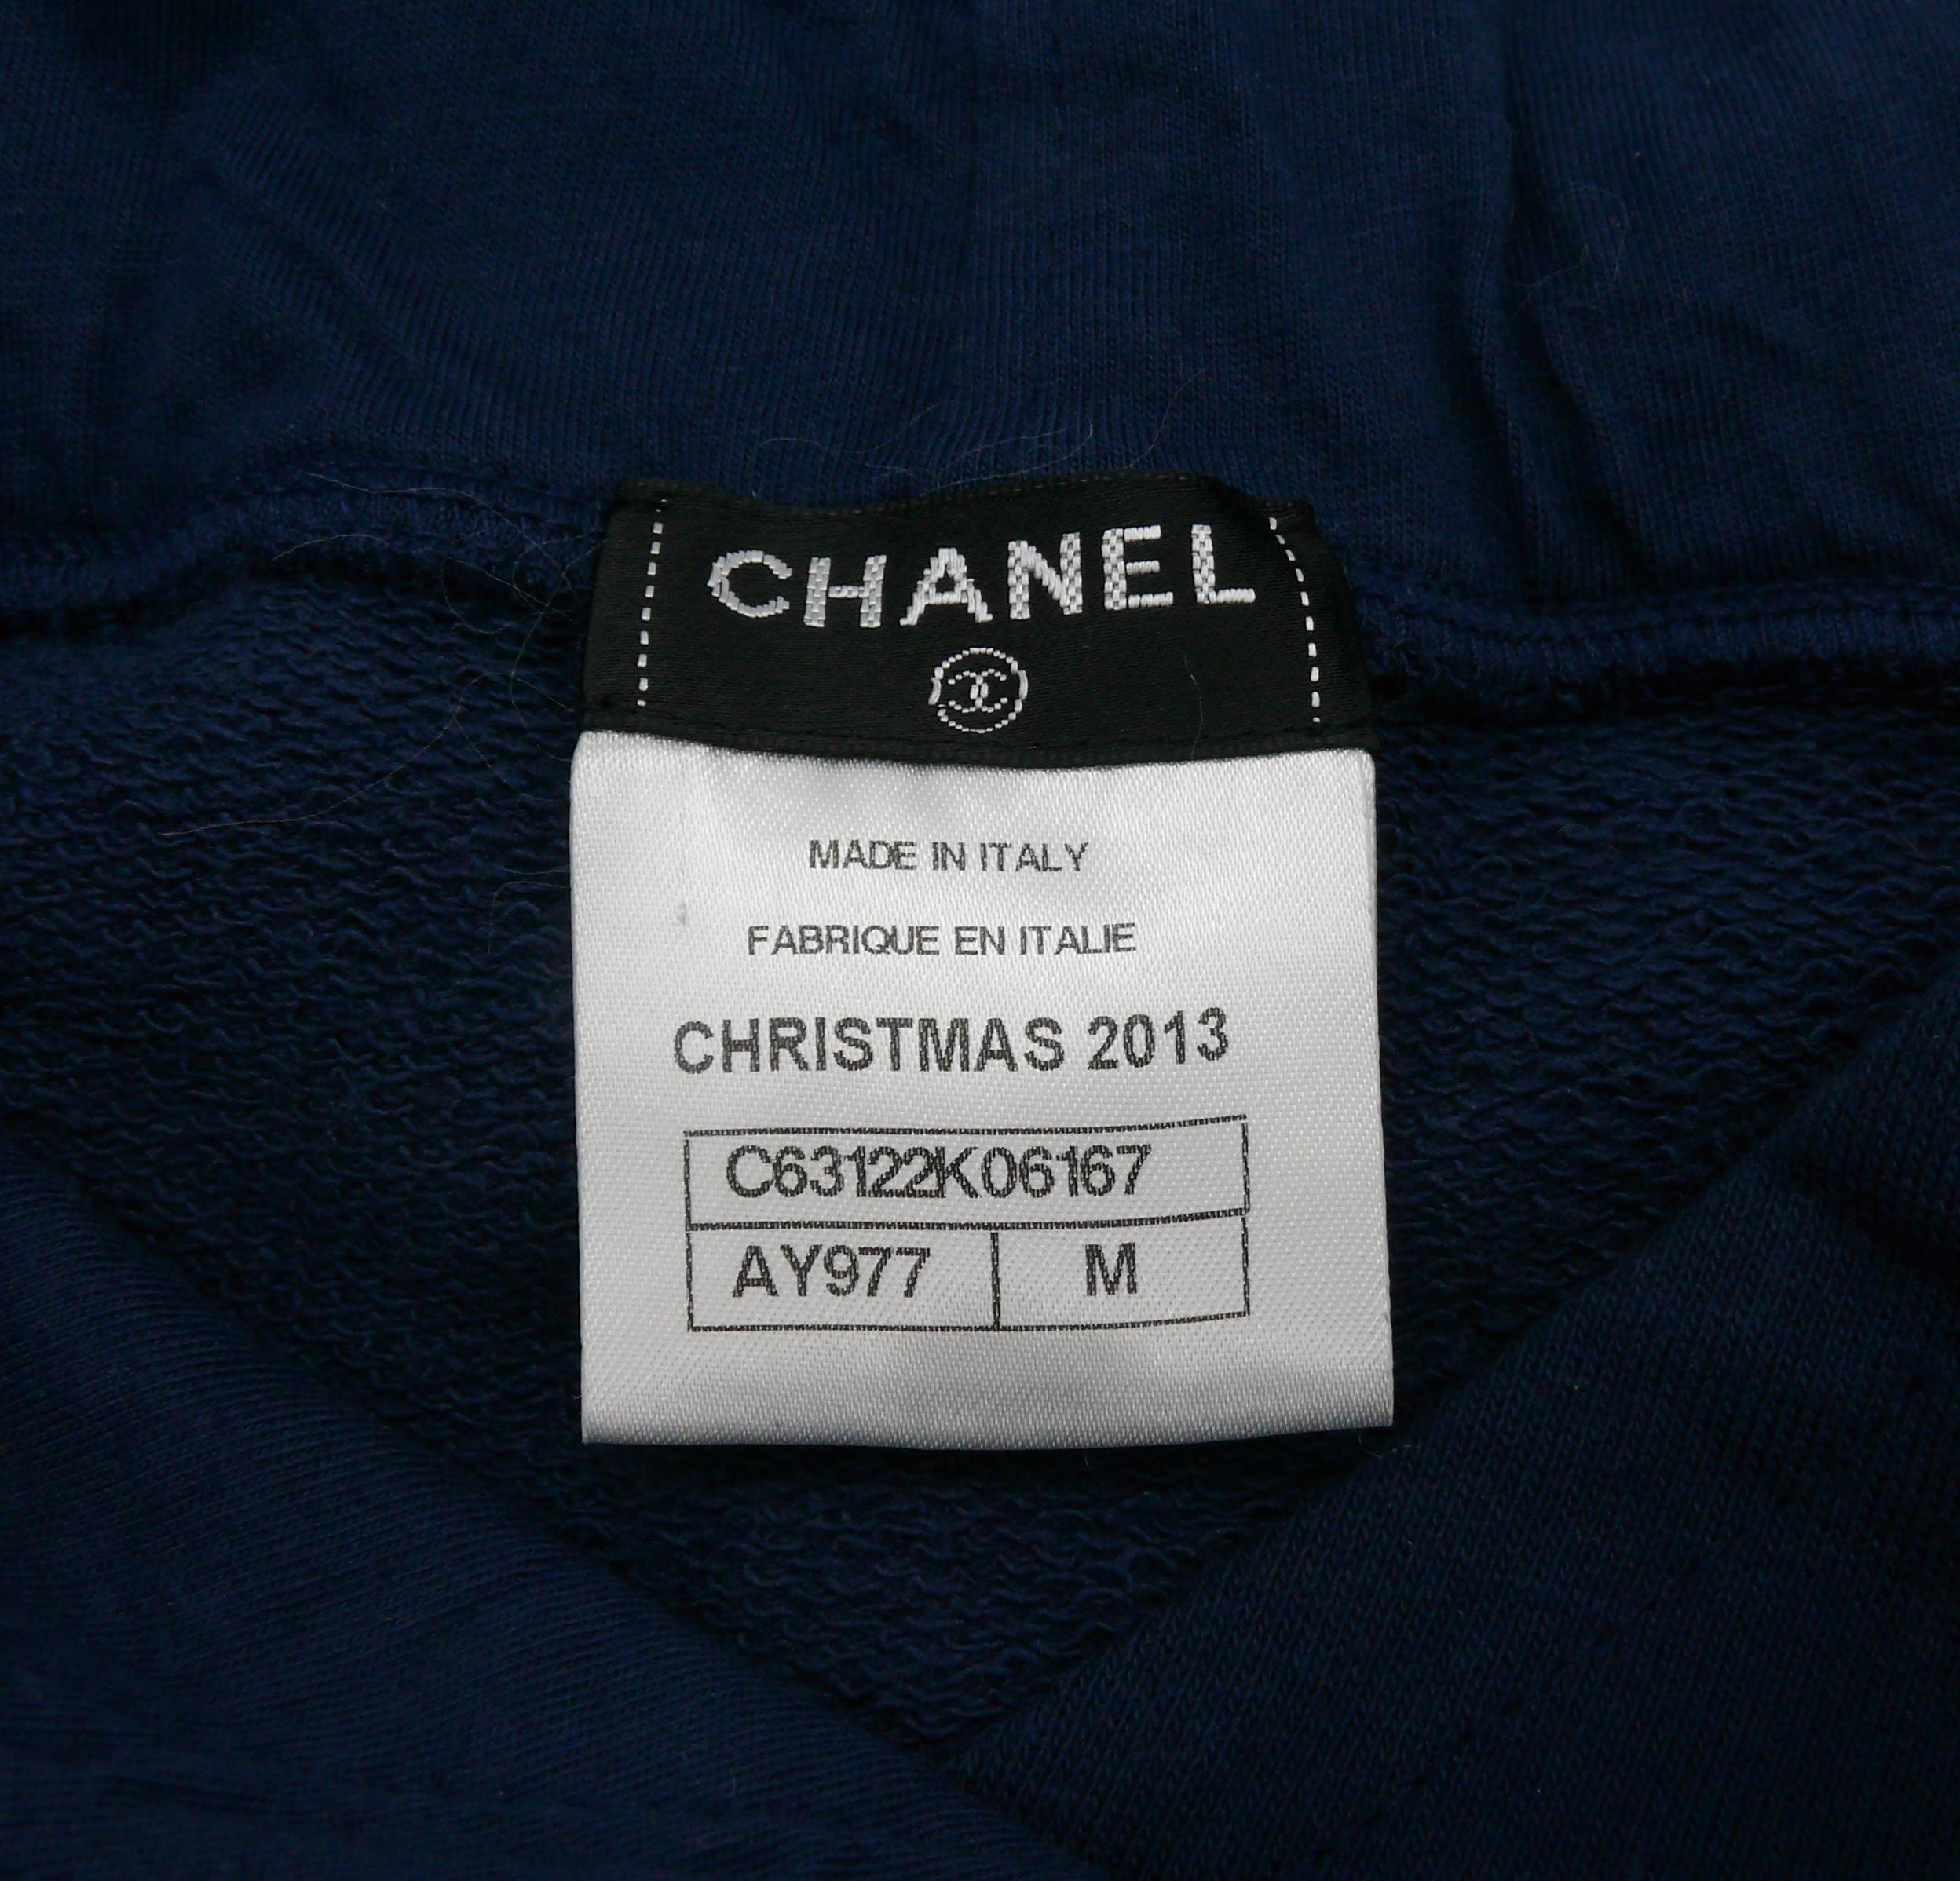 CHANEL Christmas 2013 VIPs Limited Edition Hooded Cotton Sweatshirt Size M For Sale 6